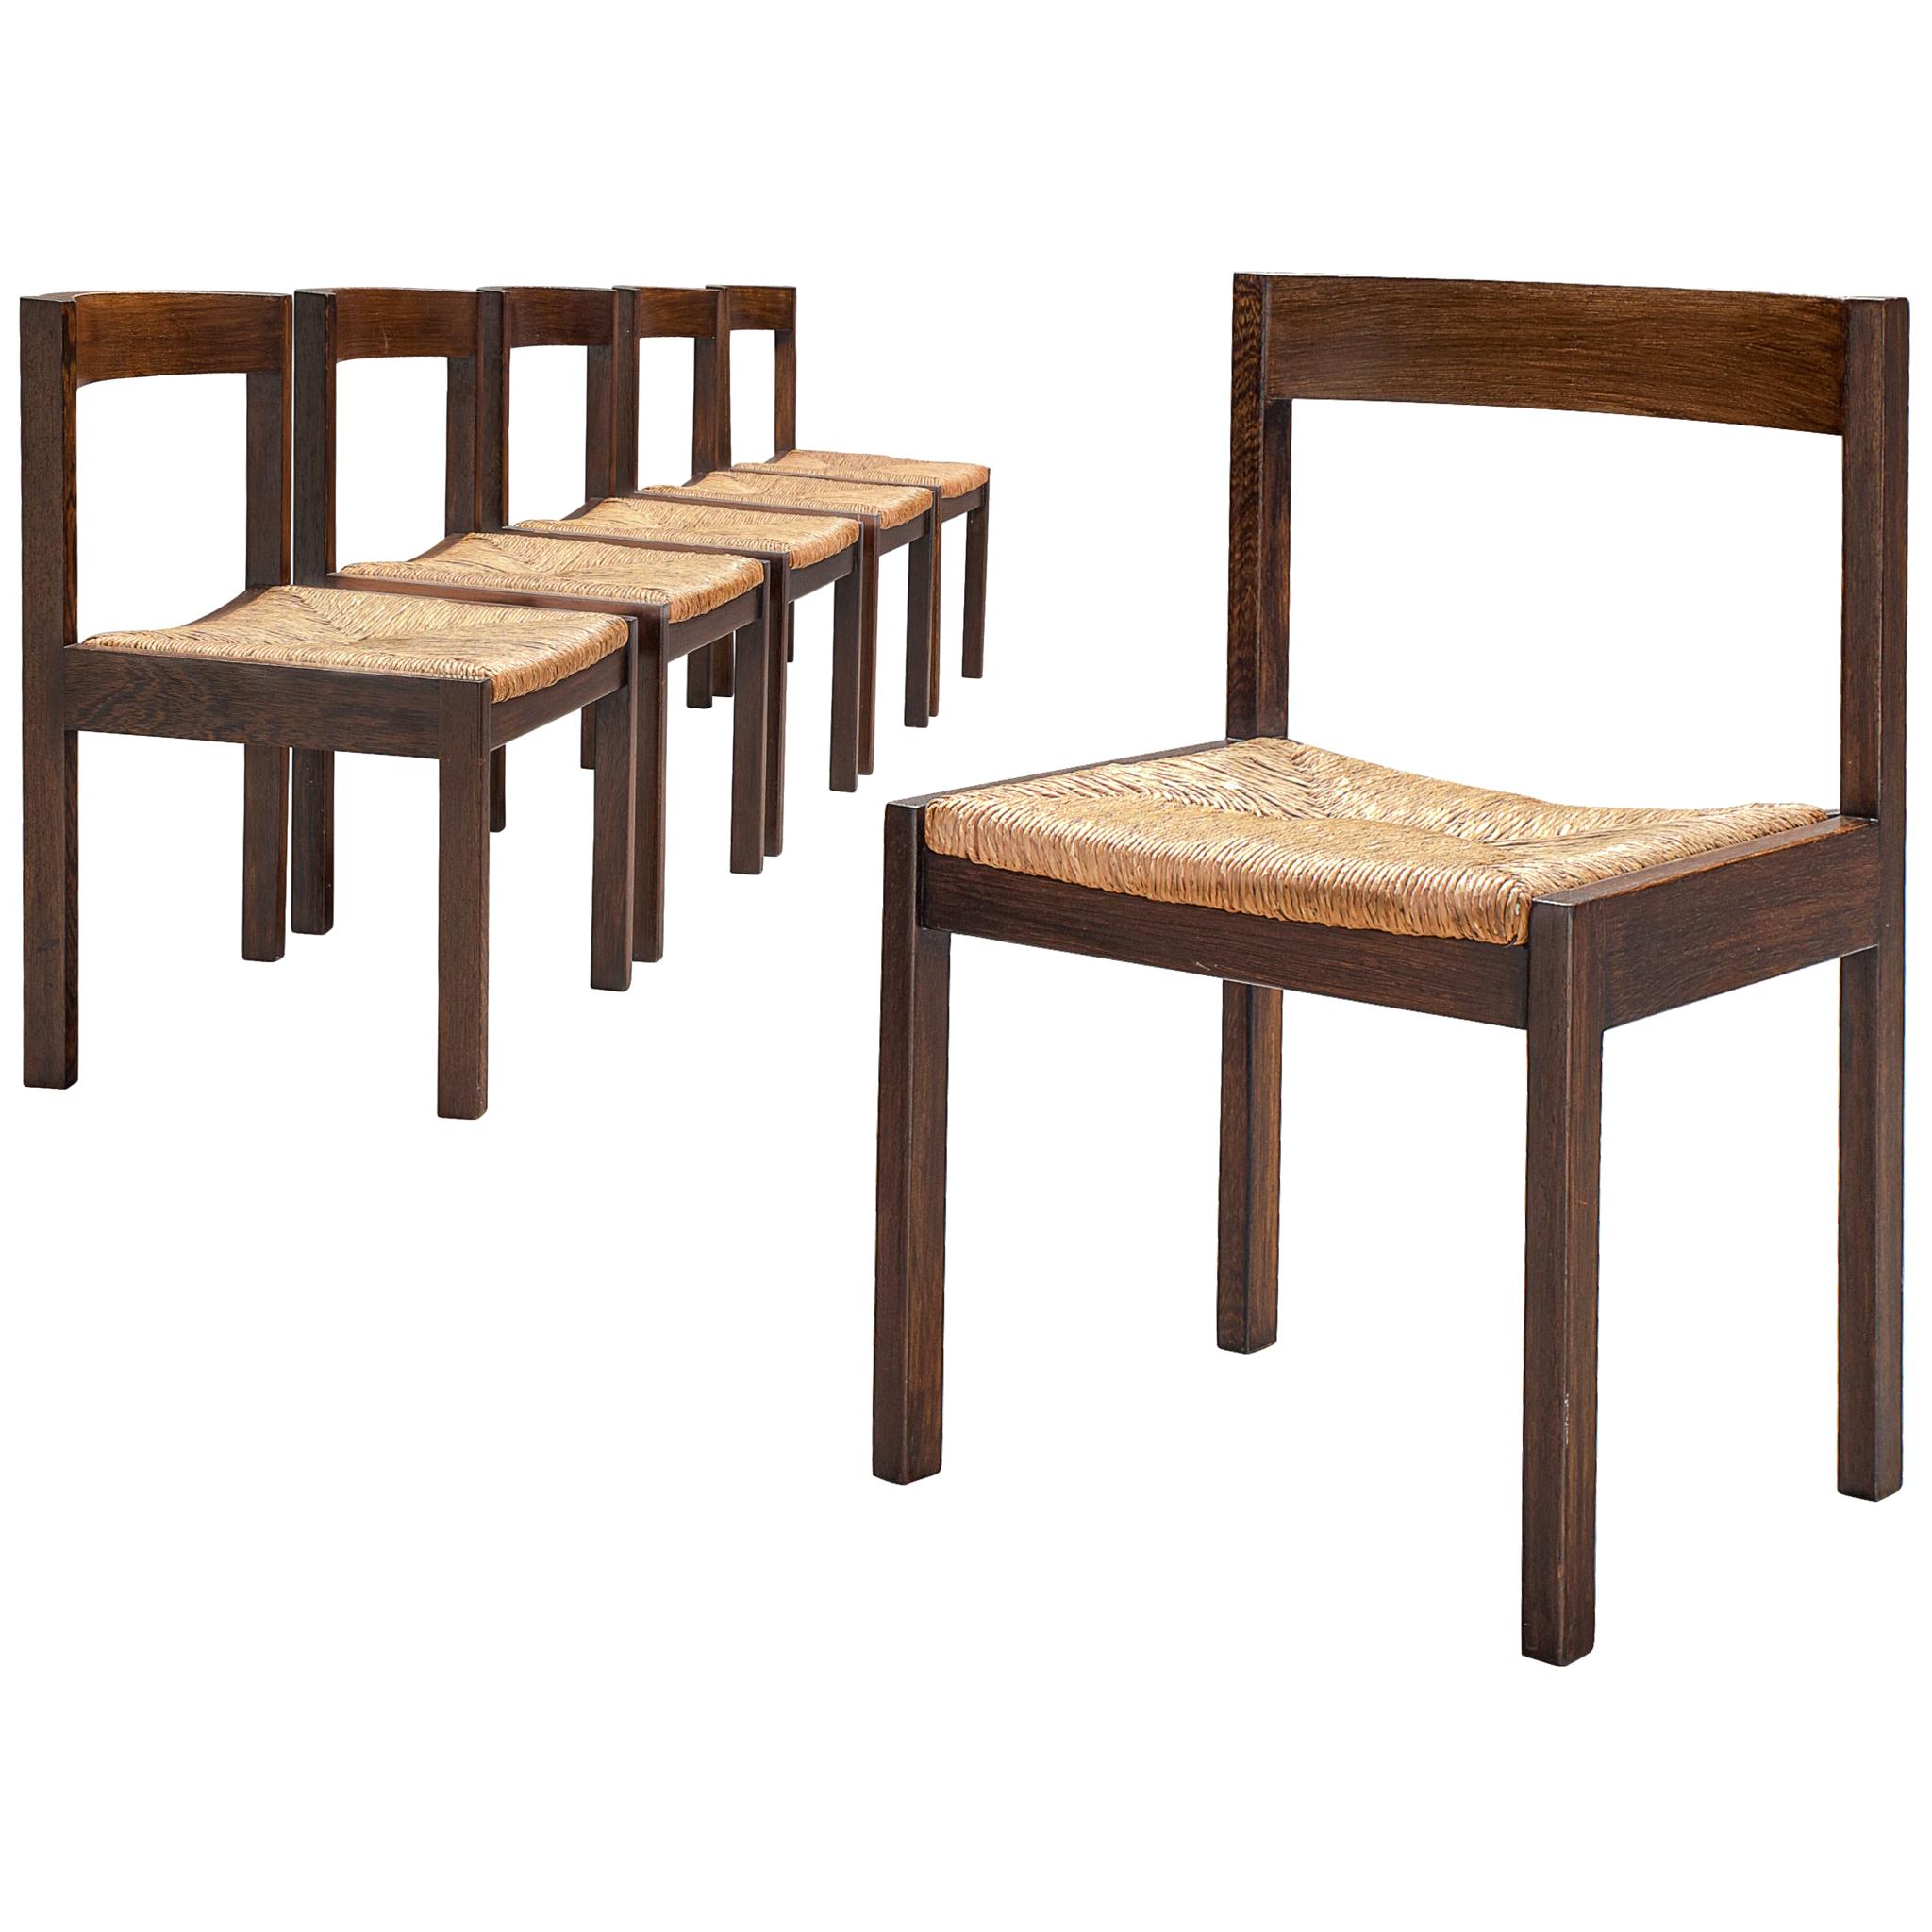 Set of 6 Dutch Dining Chairs in Wengé and Straw Seats